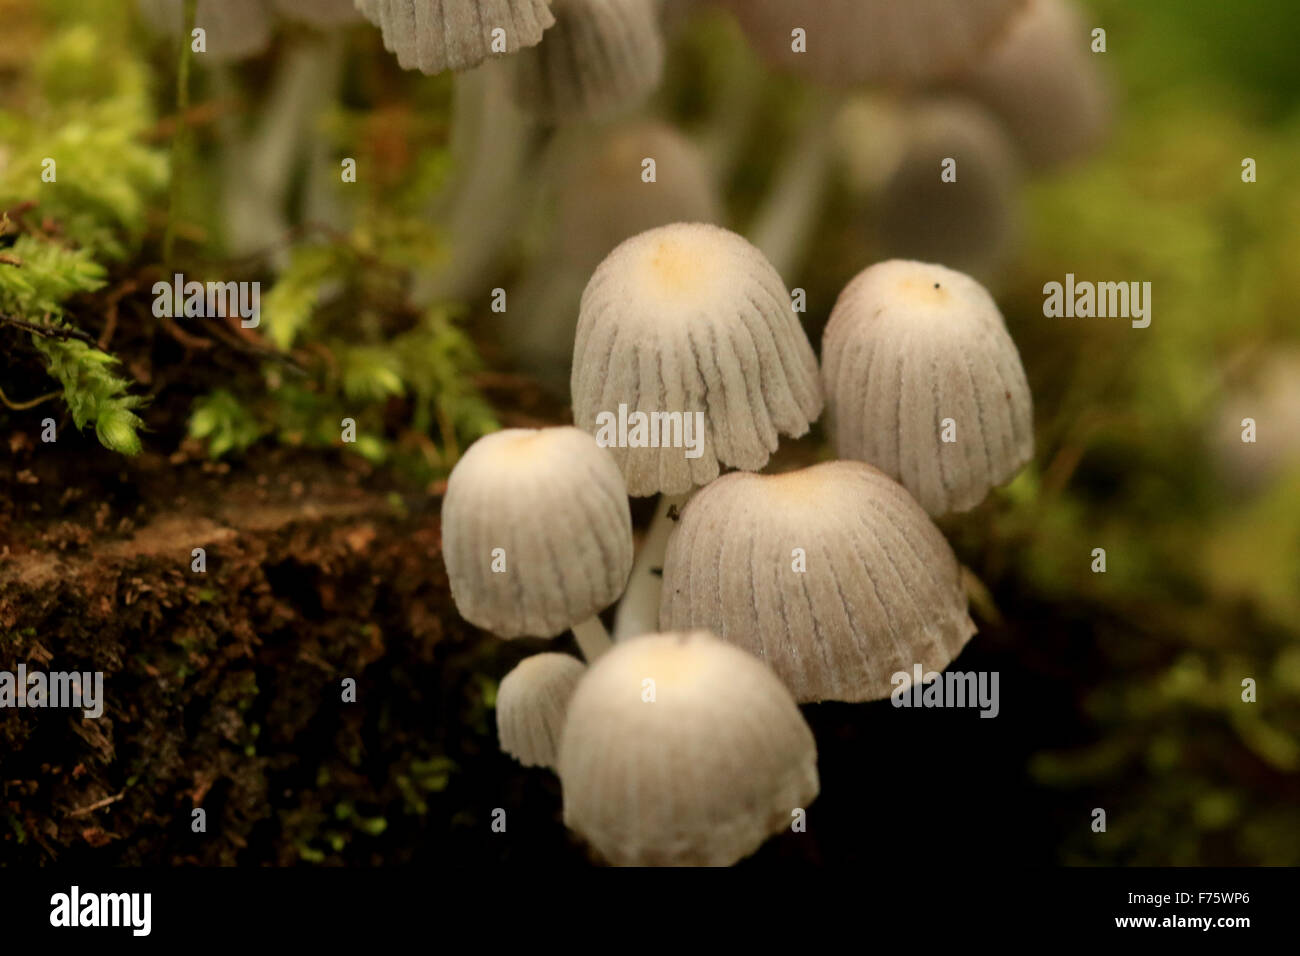 White mushroom patch / fungus patch growing on a log in the Arenal rainforest of La Fortuna, Costa Rica Stock Photo